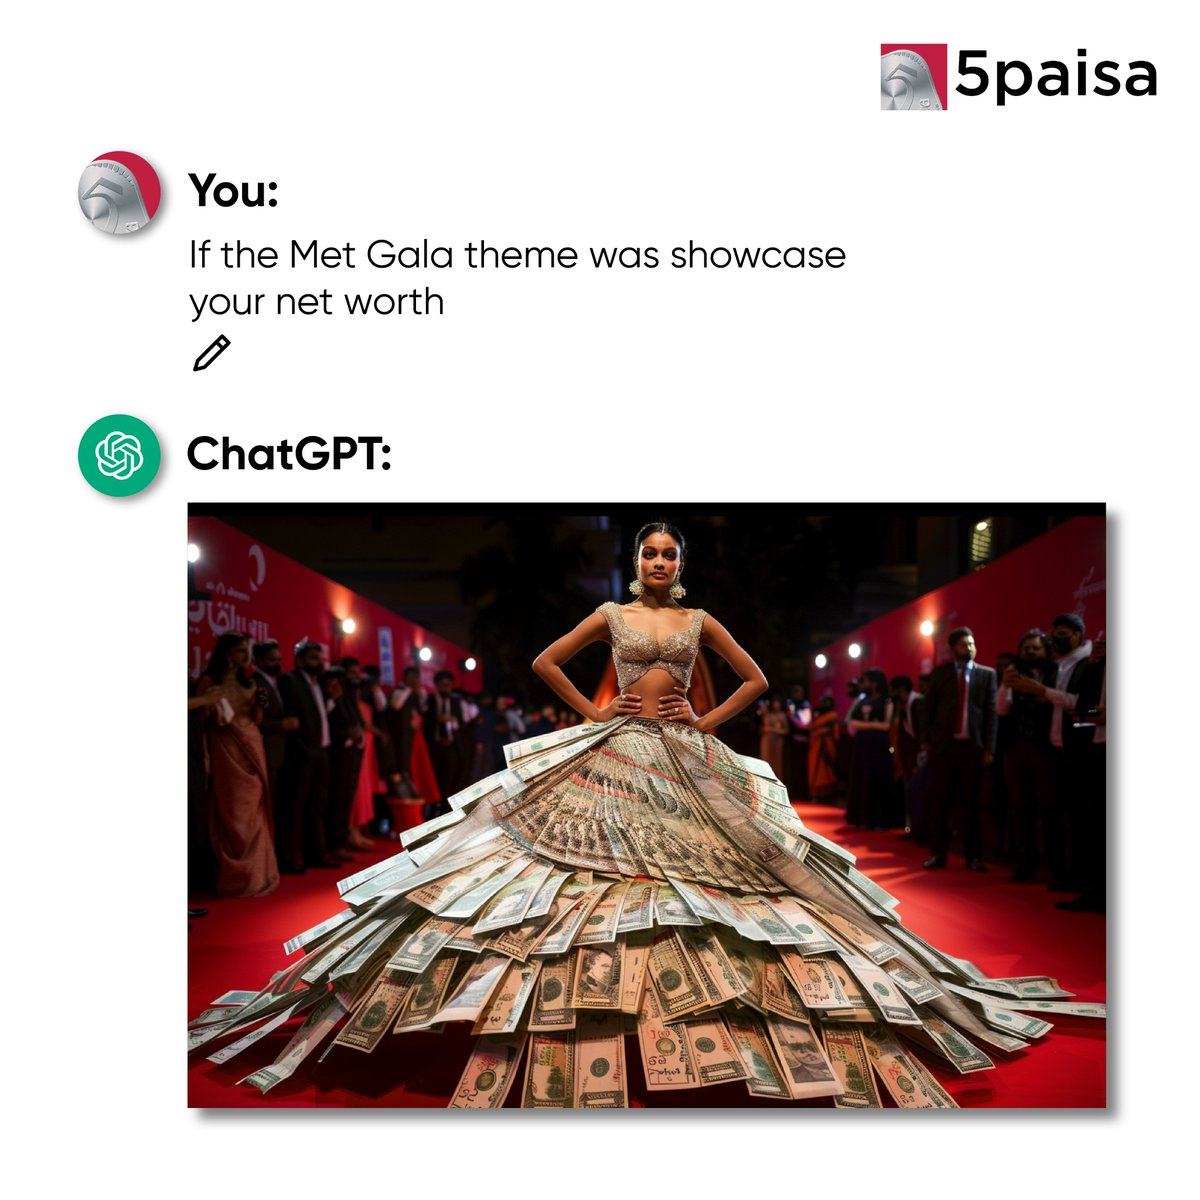 What would your outfit look like? Comment below 👇

#MetGala #SocialMediaTrends #5paisa #WeAskAi